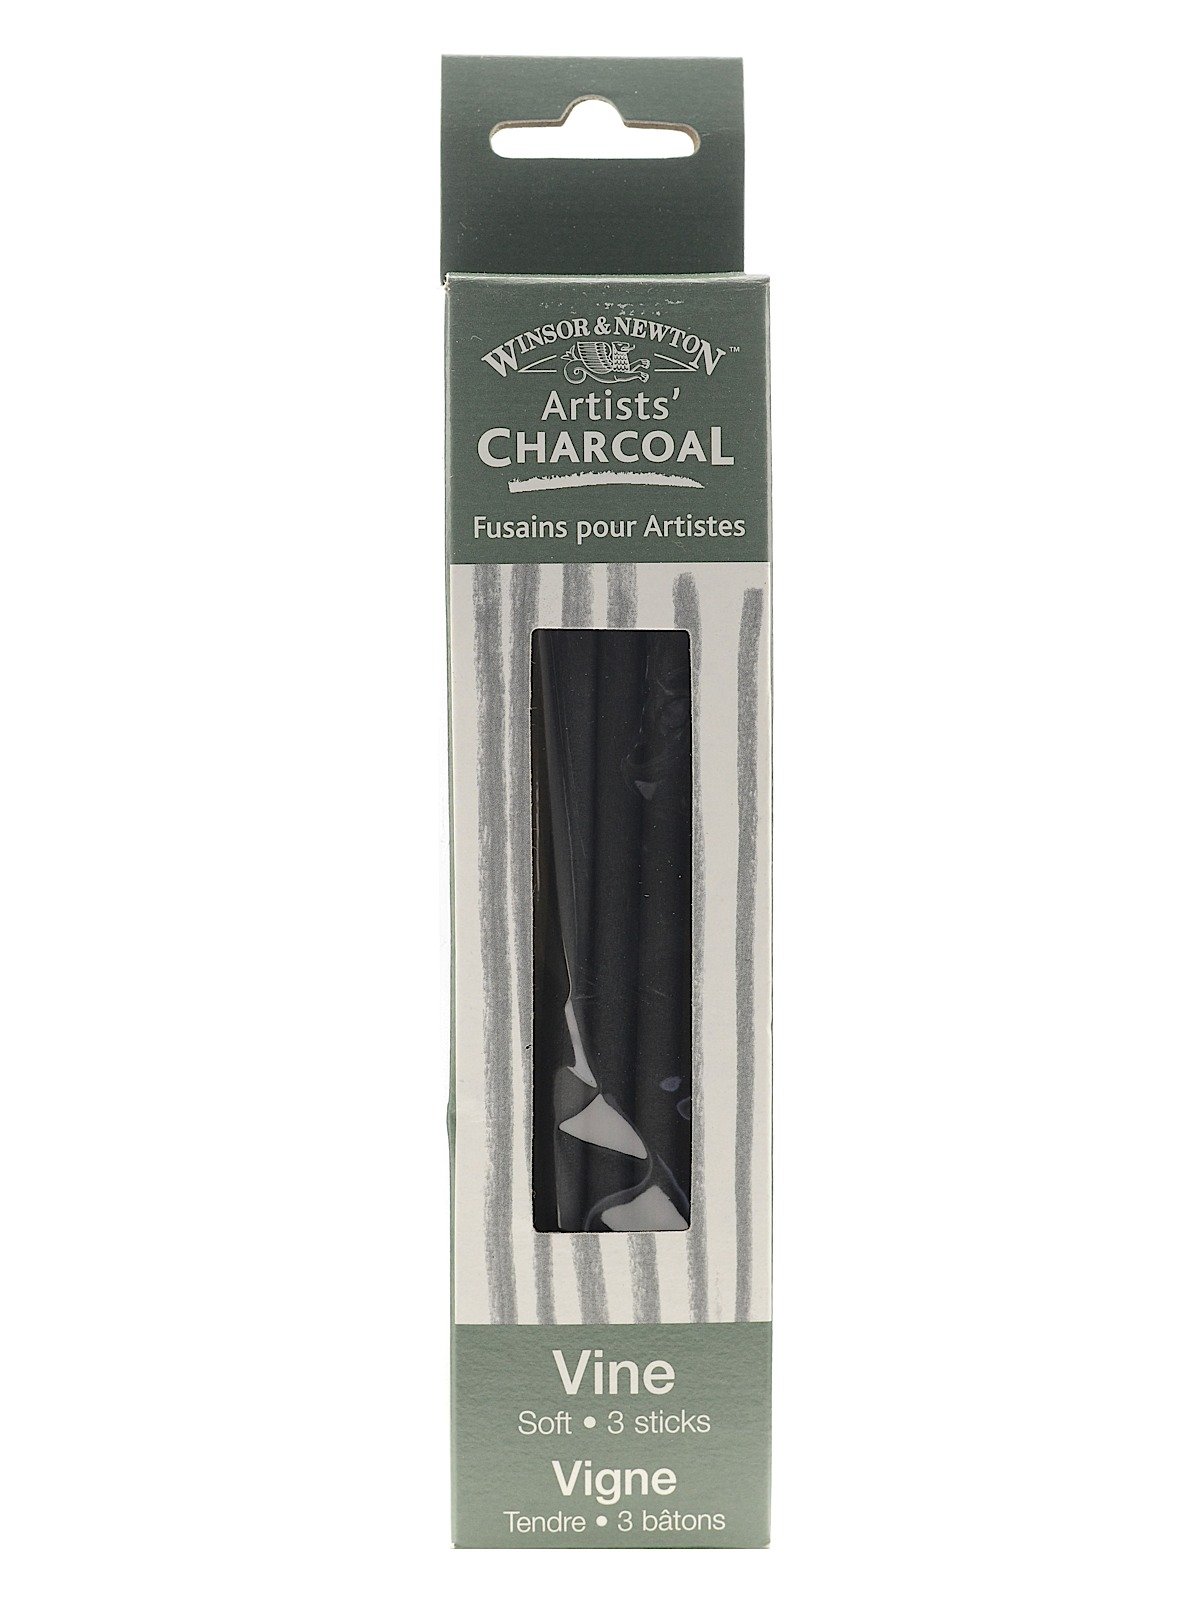 Winsor & Newton Vine Charcoal - Extra Soft, Pack of 12